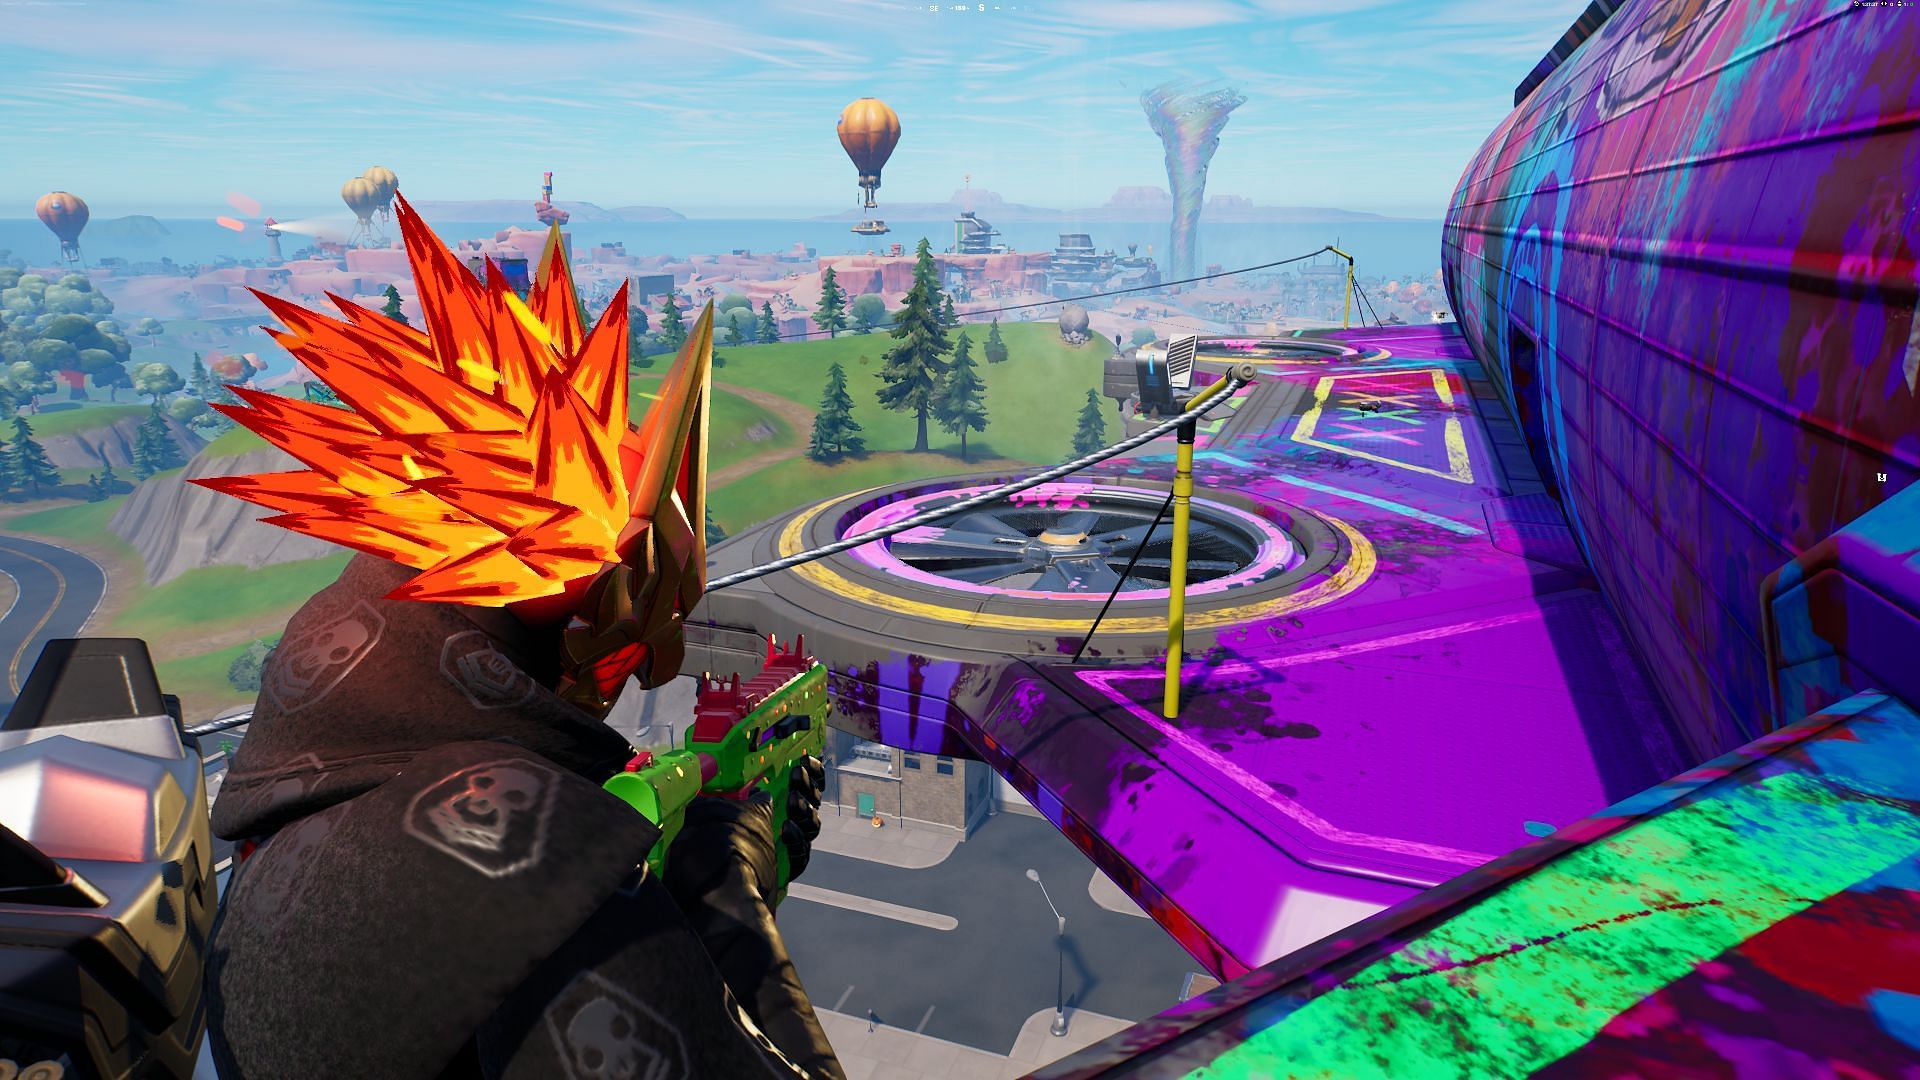 Use the giant fans to glide to safety (Image via Epic Games/Fortnite)